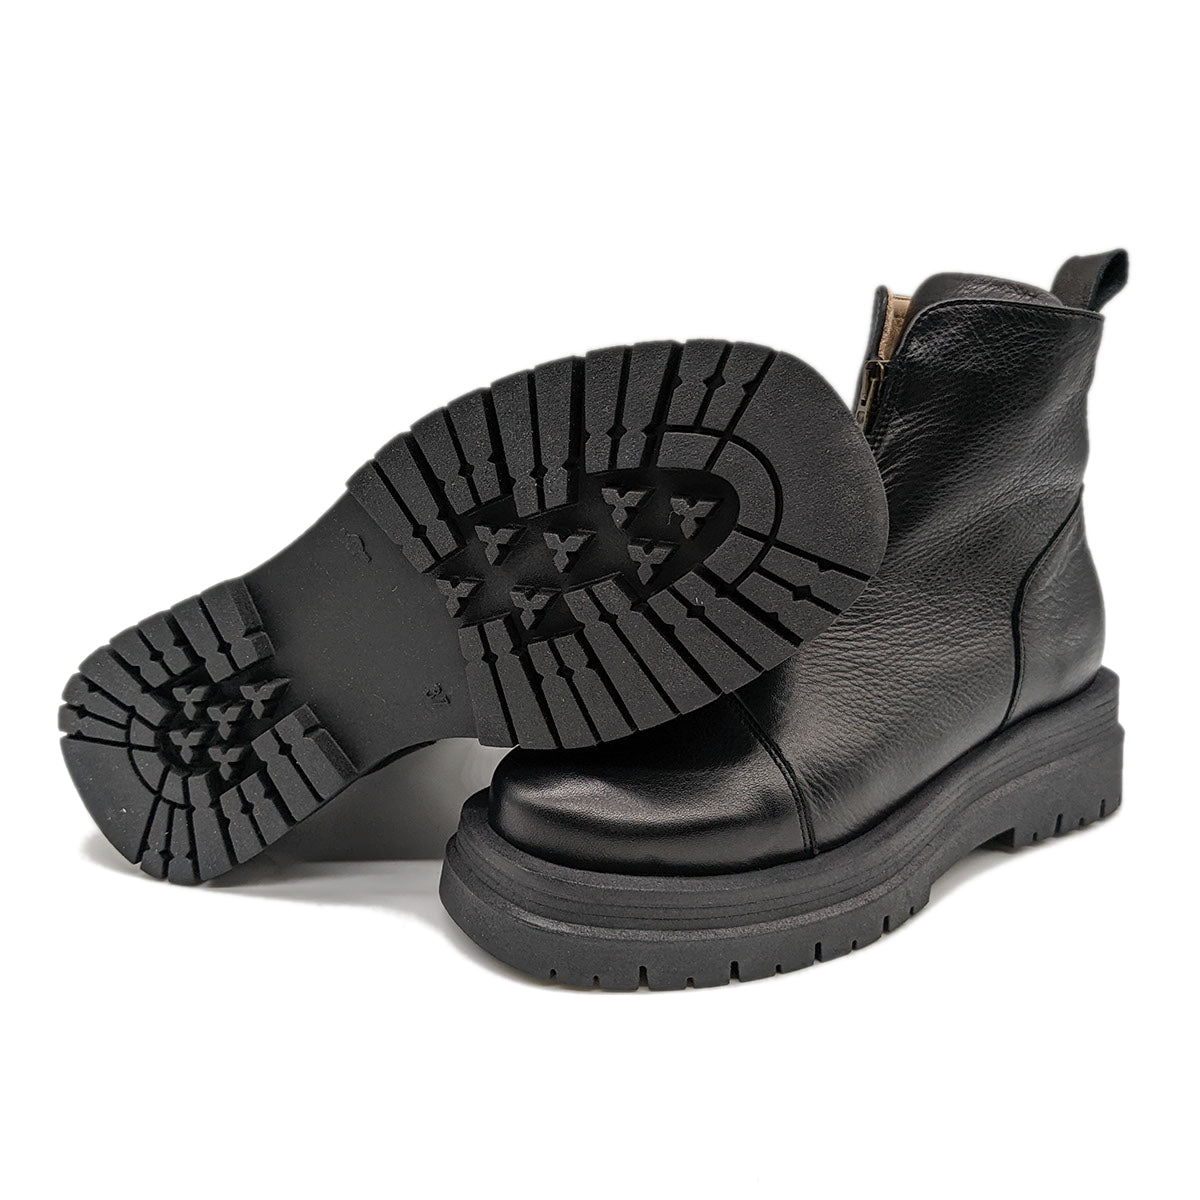 Serval zipper boots made of organic leather